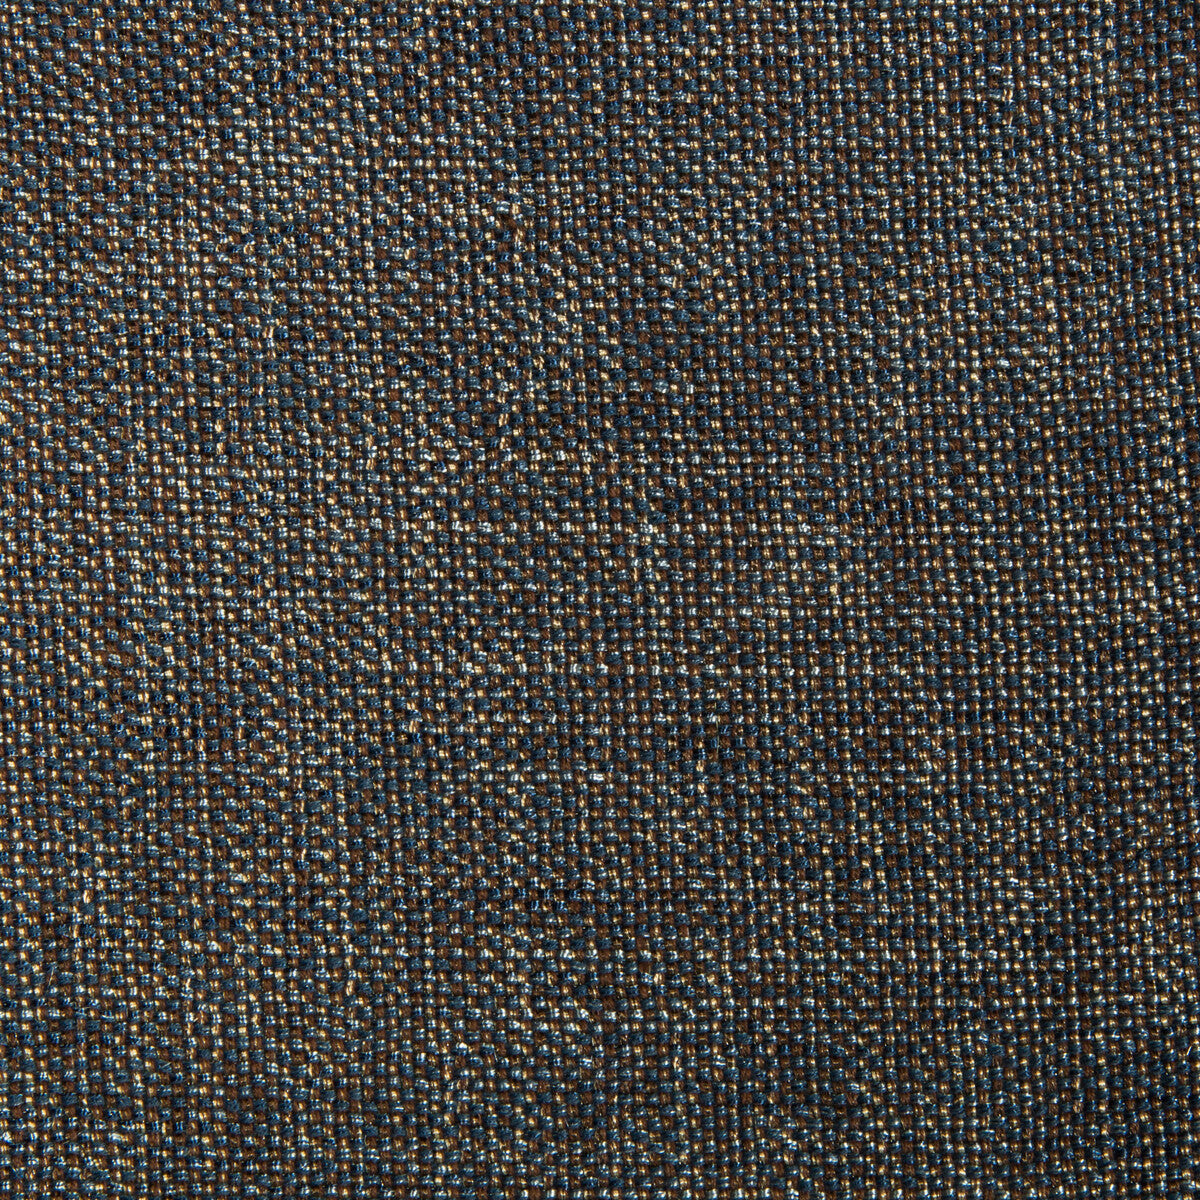 Kravet Contract fabric in 4458-516 color - pattern 4458.516.0 - by Kravet Contract